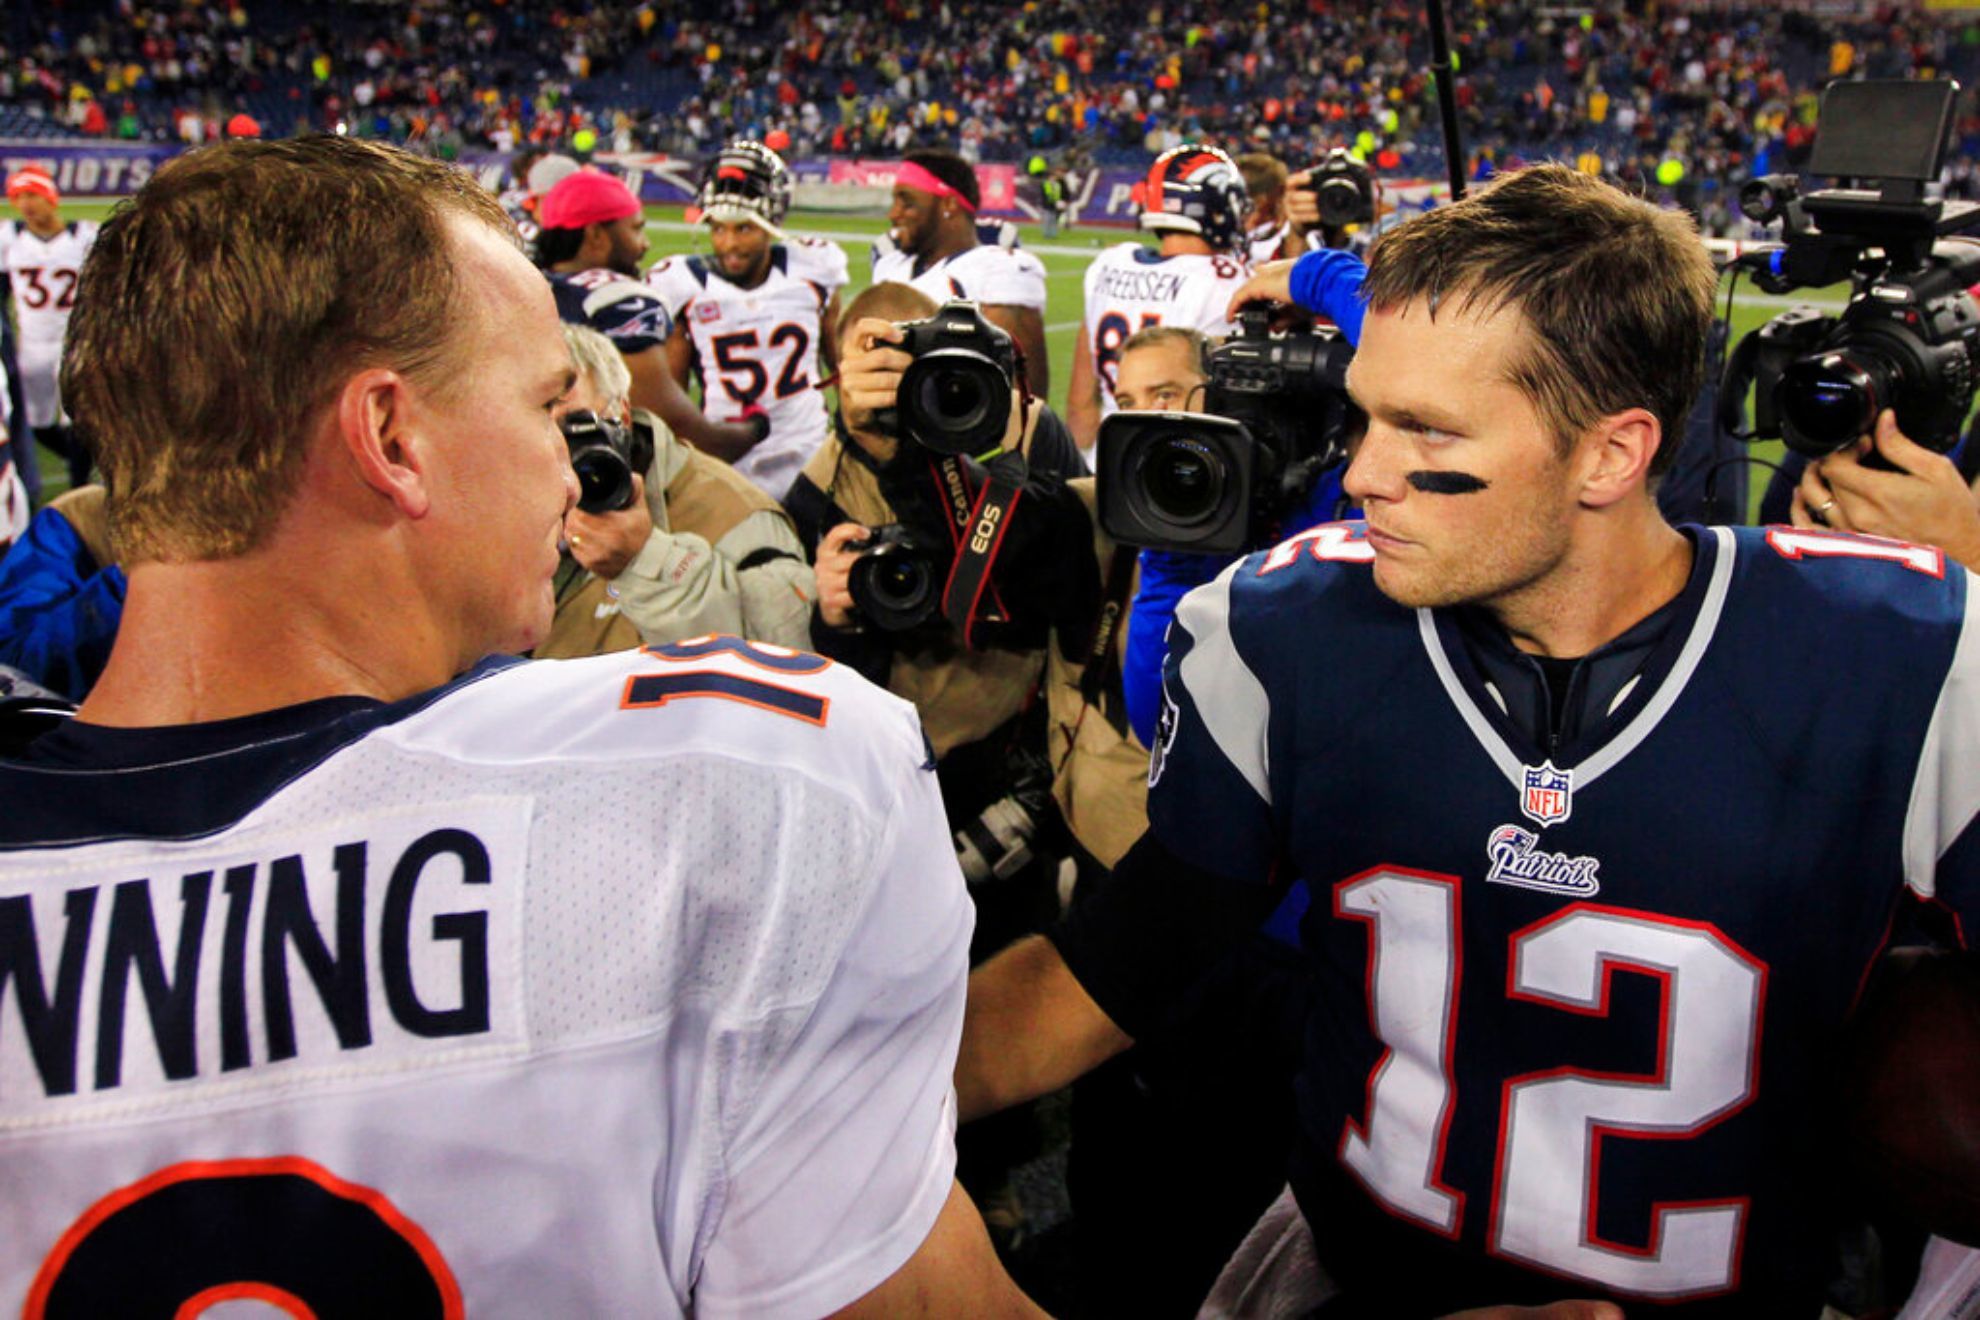 Brady and Manning made up one of the NFLs fiercest rivalries